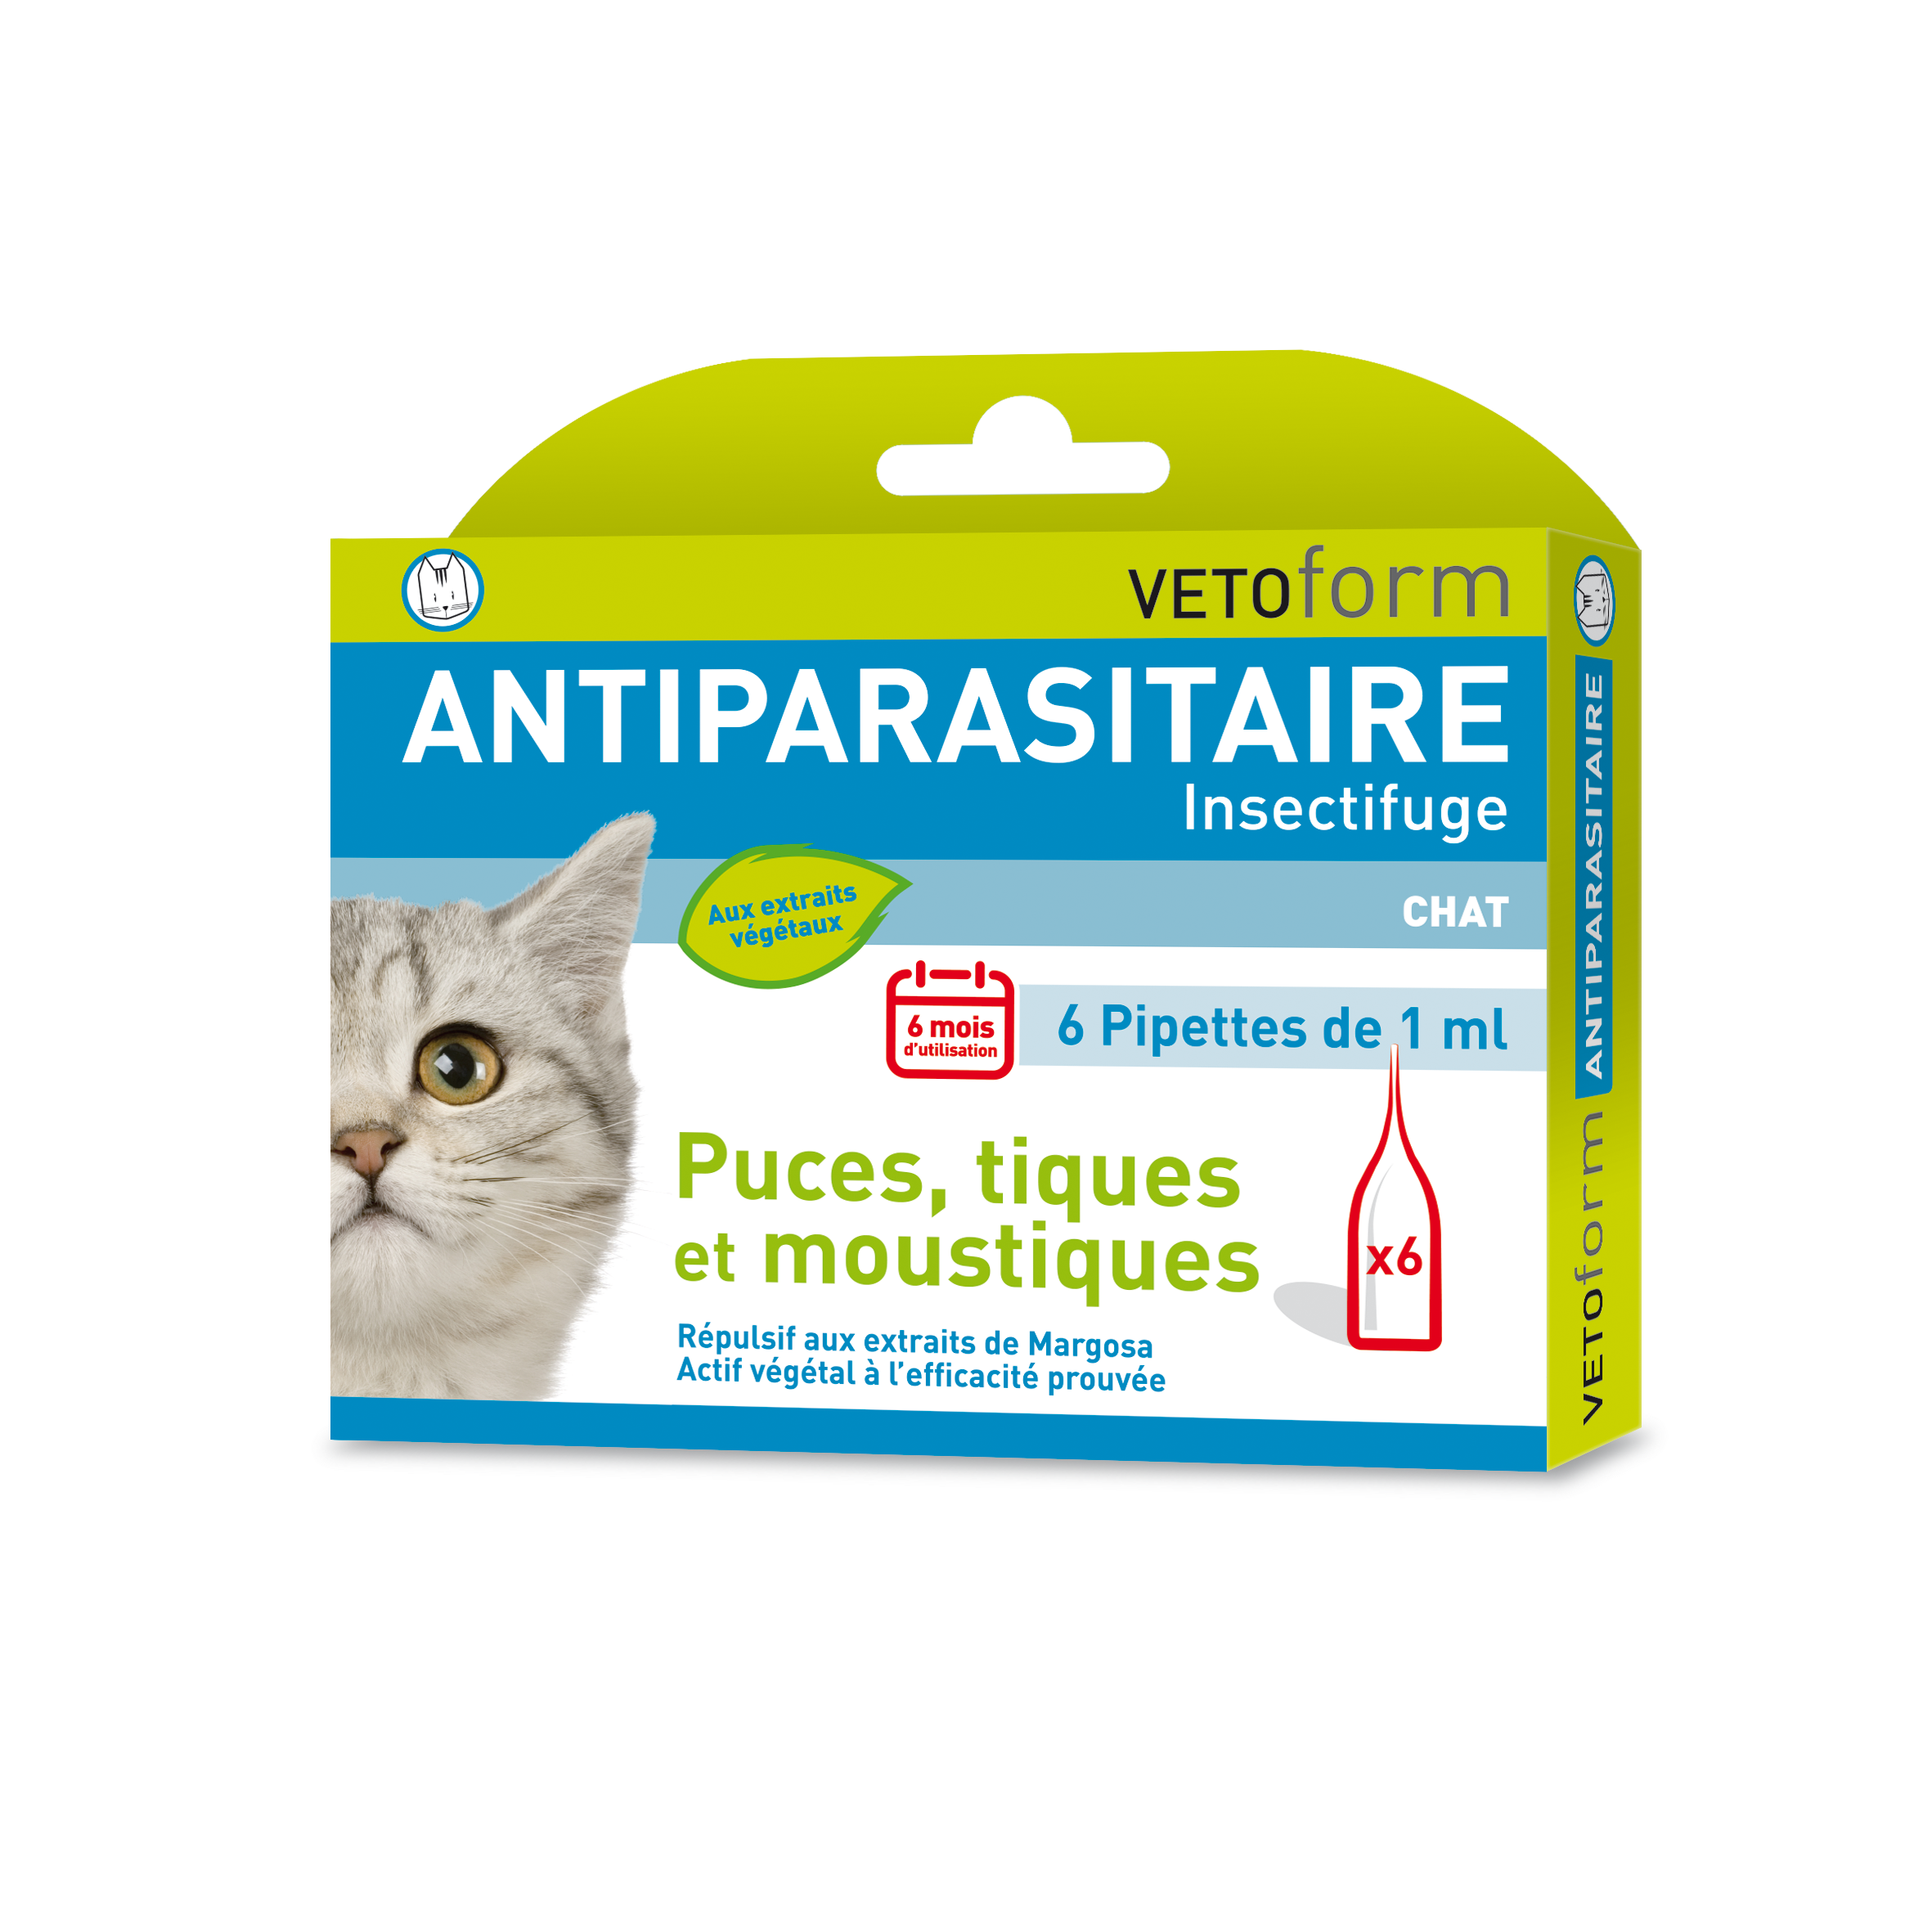 Antiparasitaire Insectifuge Naturel Chat 6 Pipettes De 1 Ml Veto Best